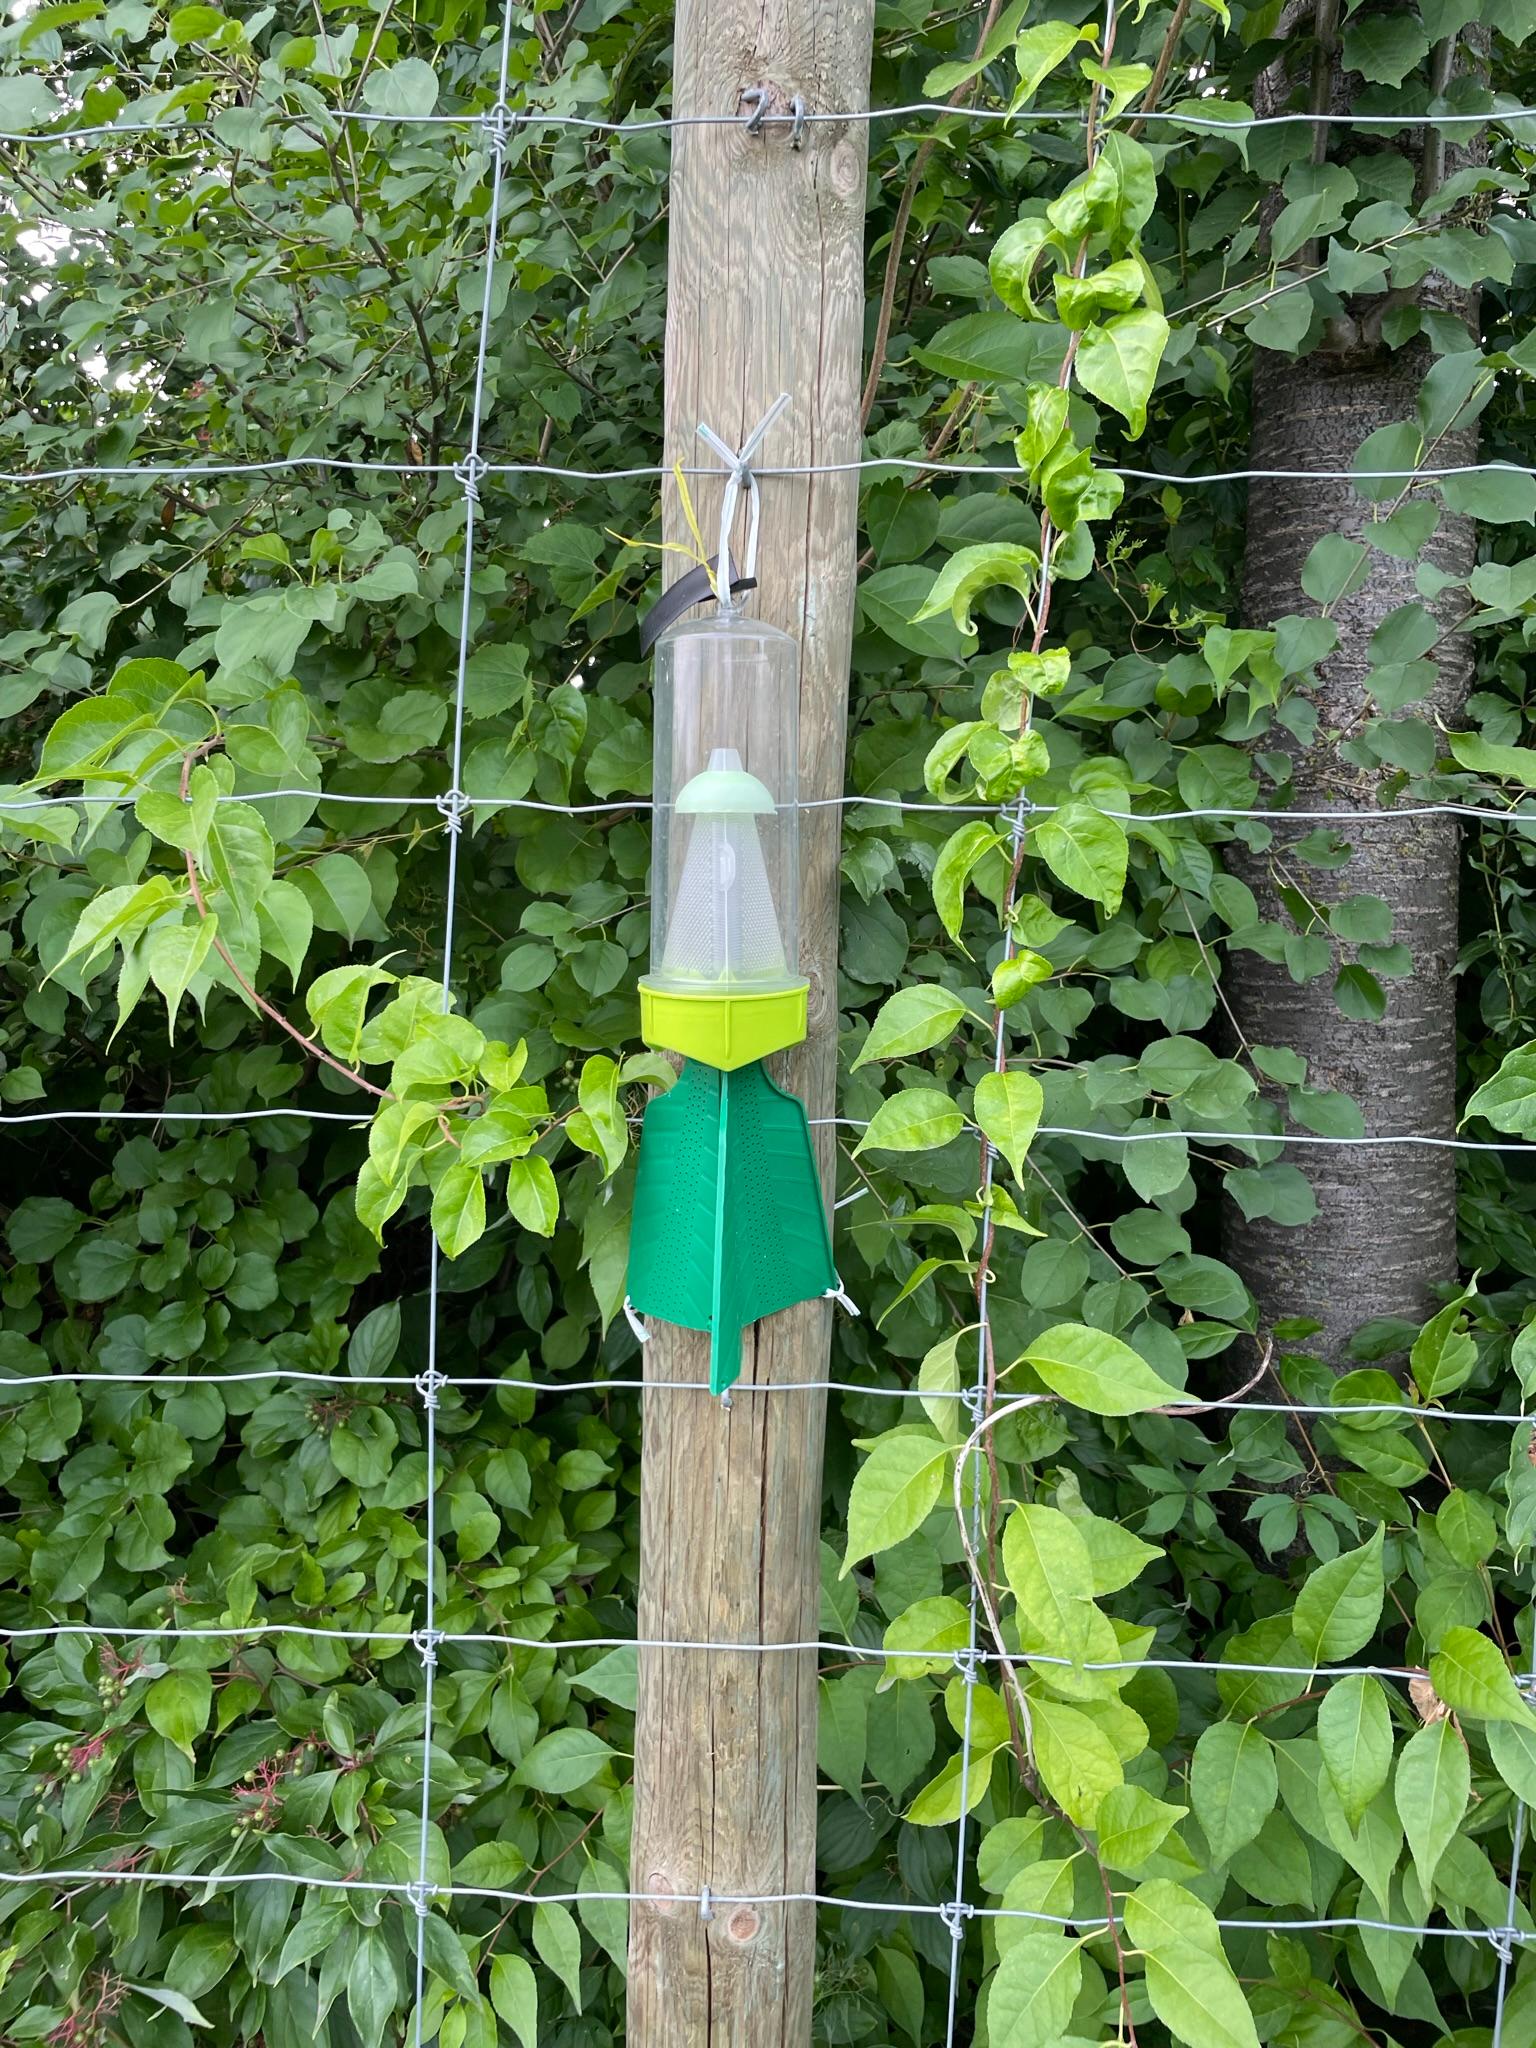 A bug trap attached to a pole next to a field.